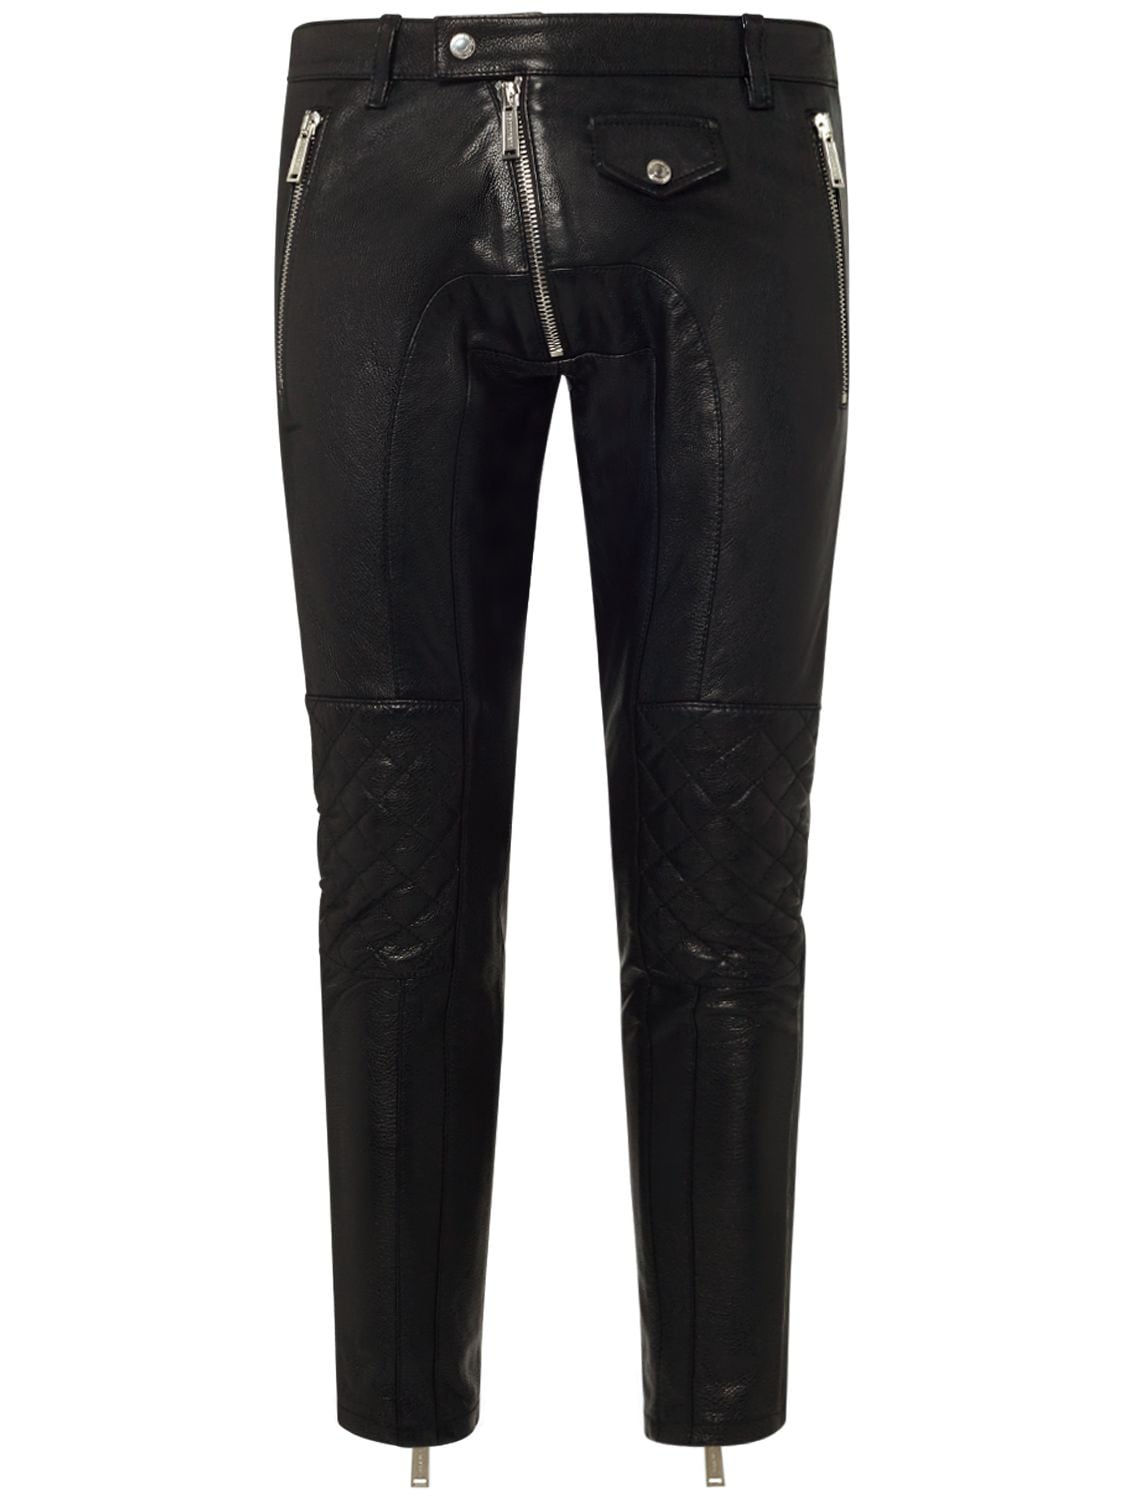 Image of Sexy Biker Leather Pants